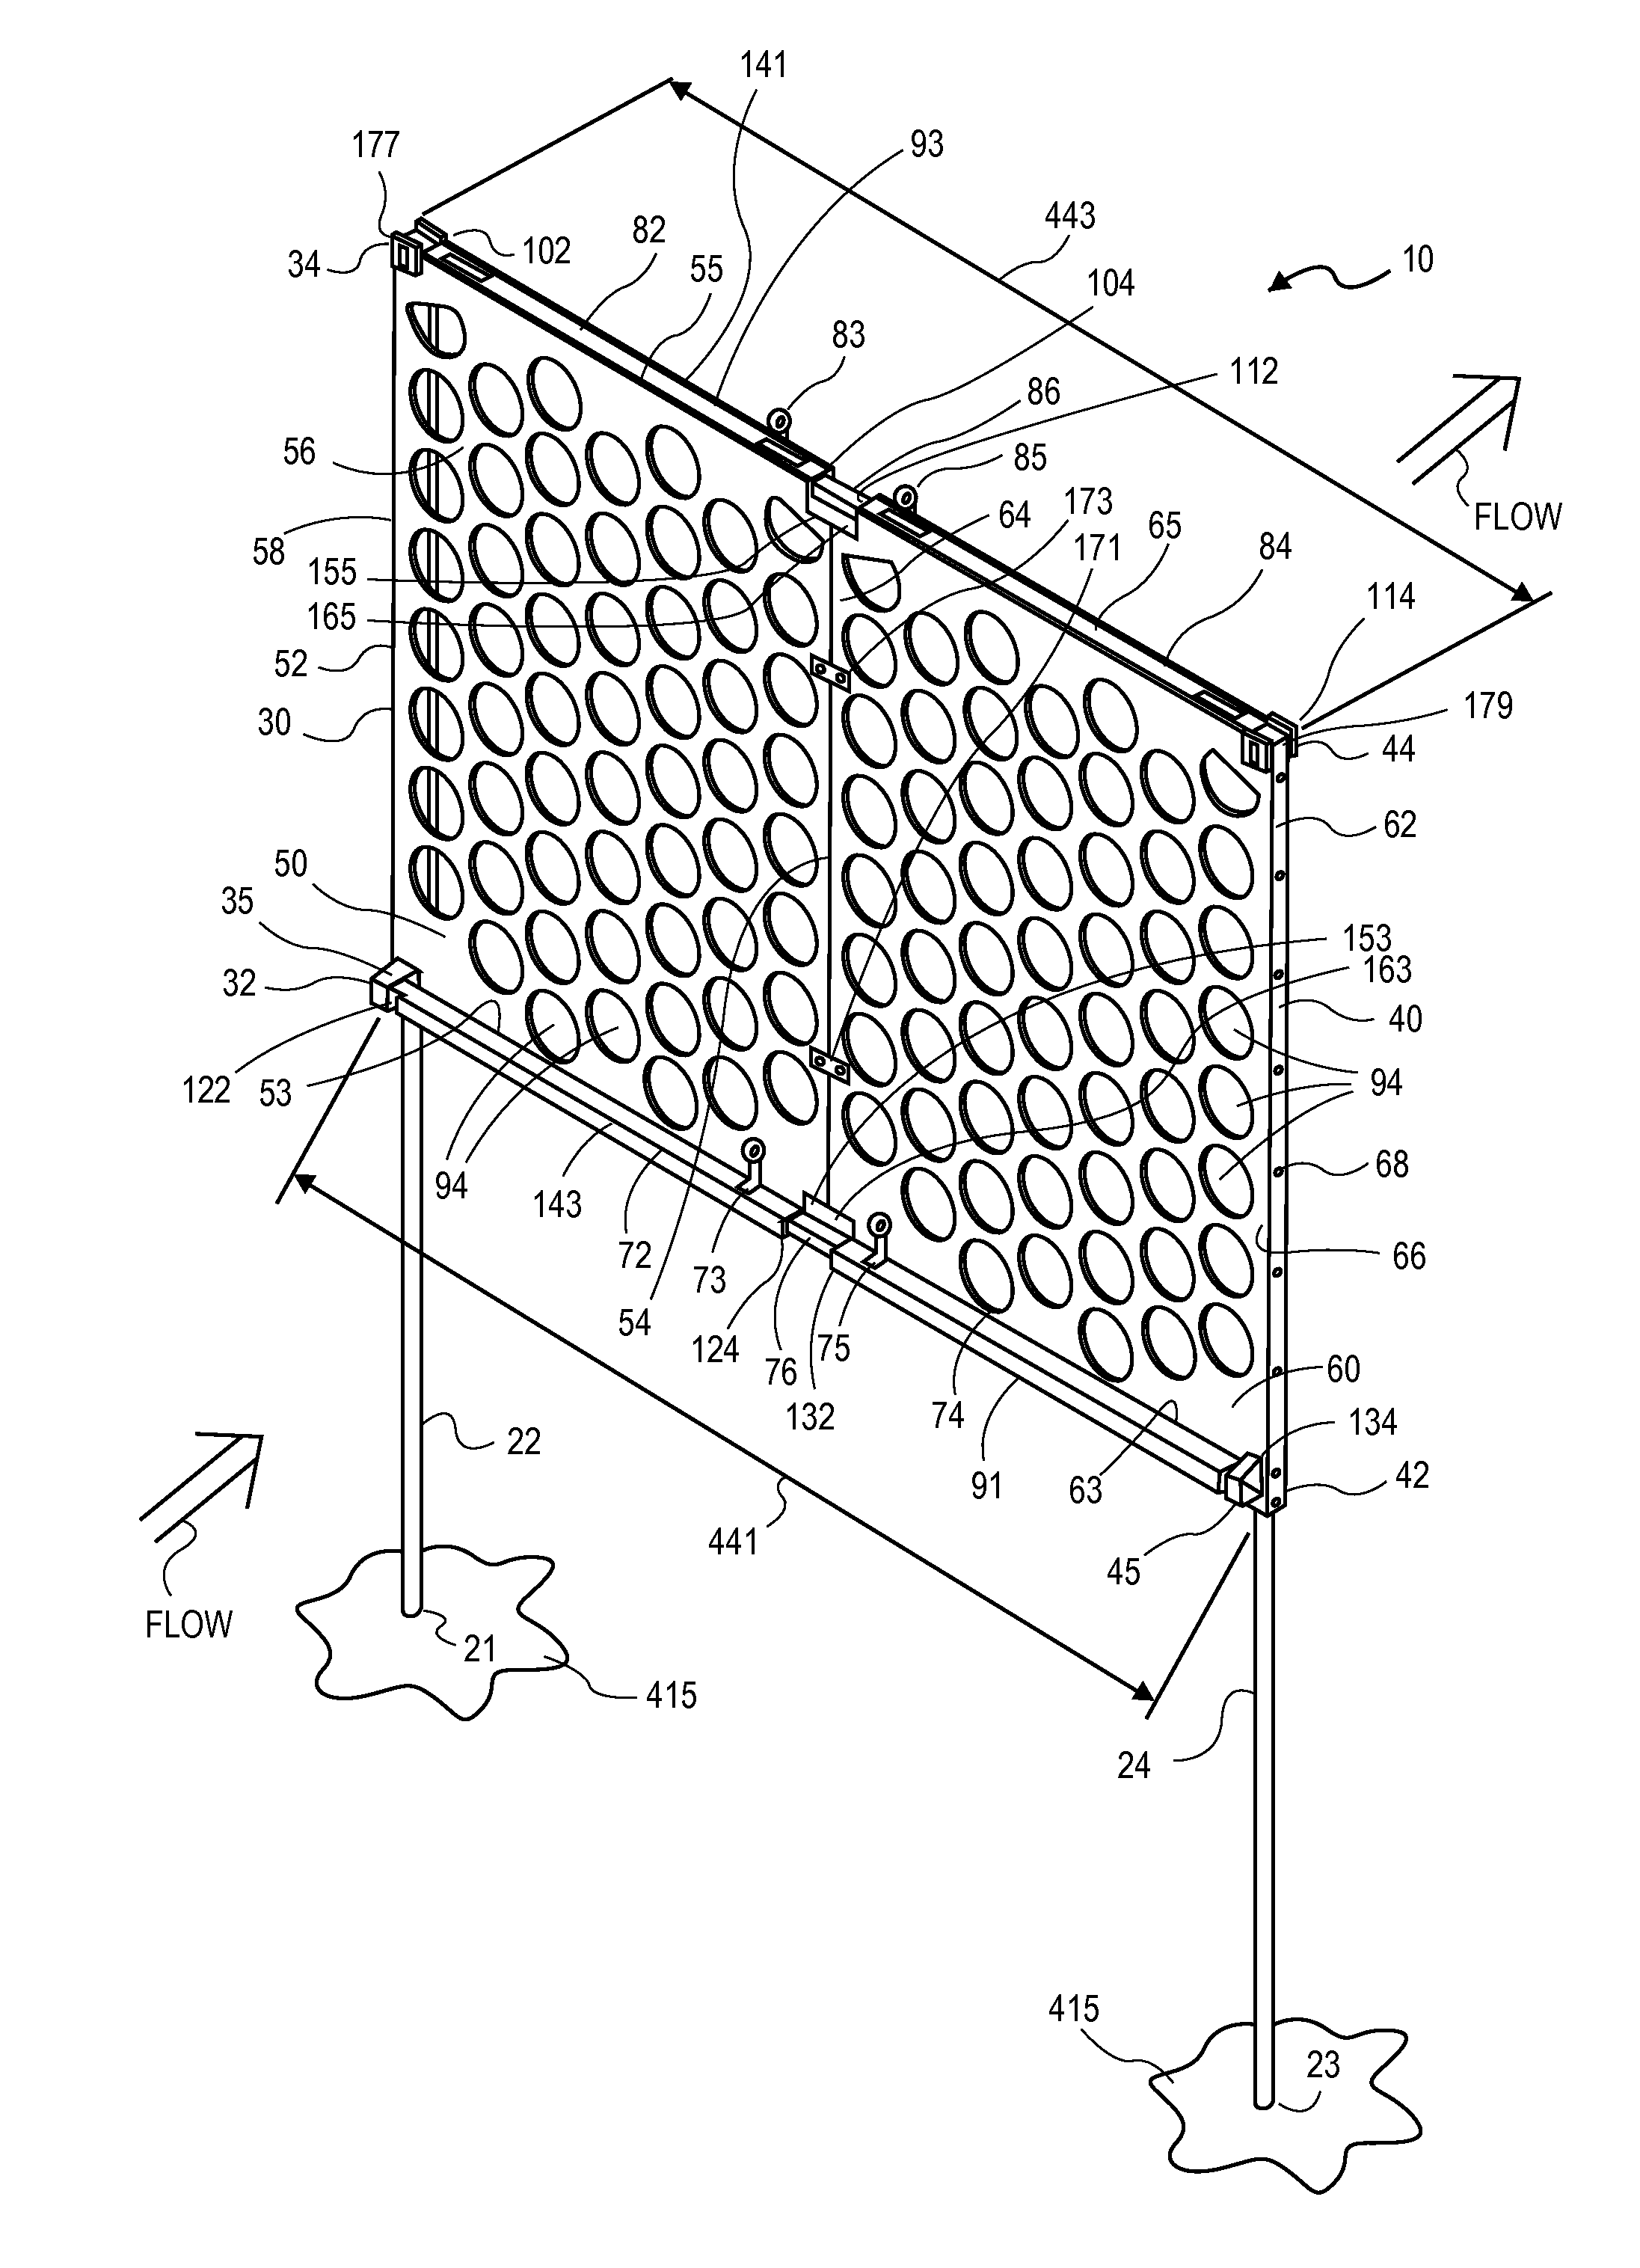 Flow baffle installation methods and apparatus